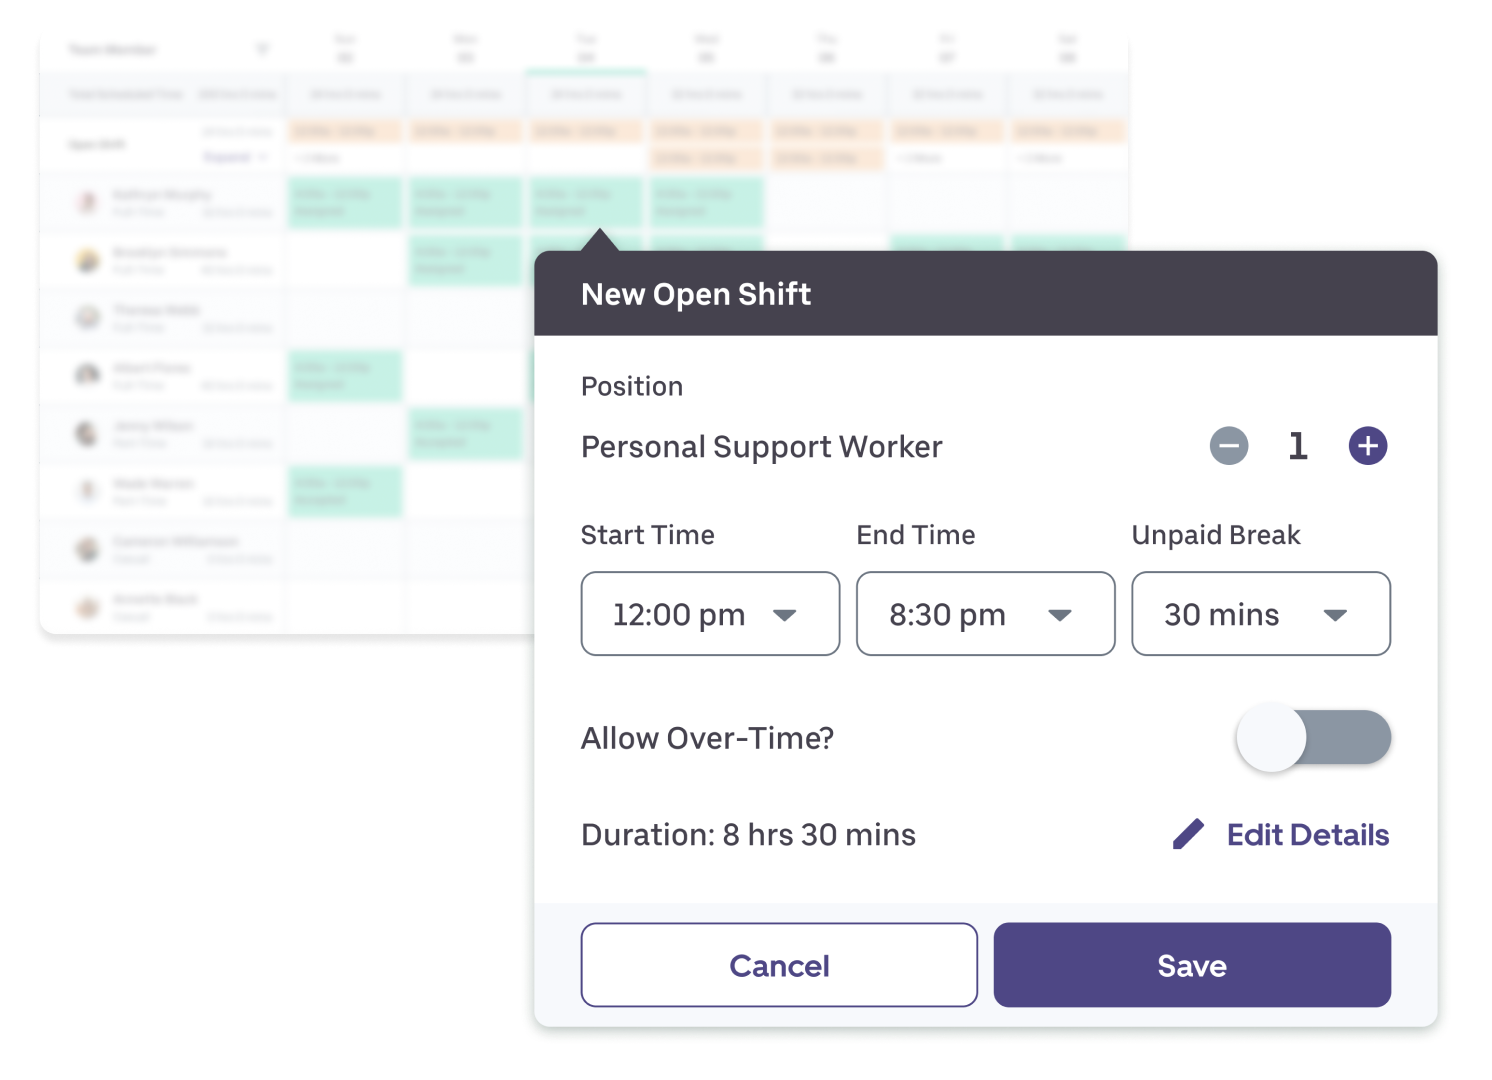 BookJane scheduling platform showing new open shift for a personal support worker